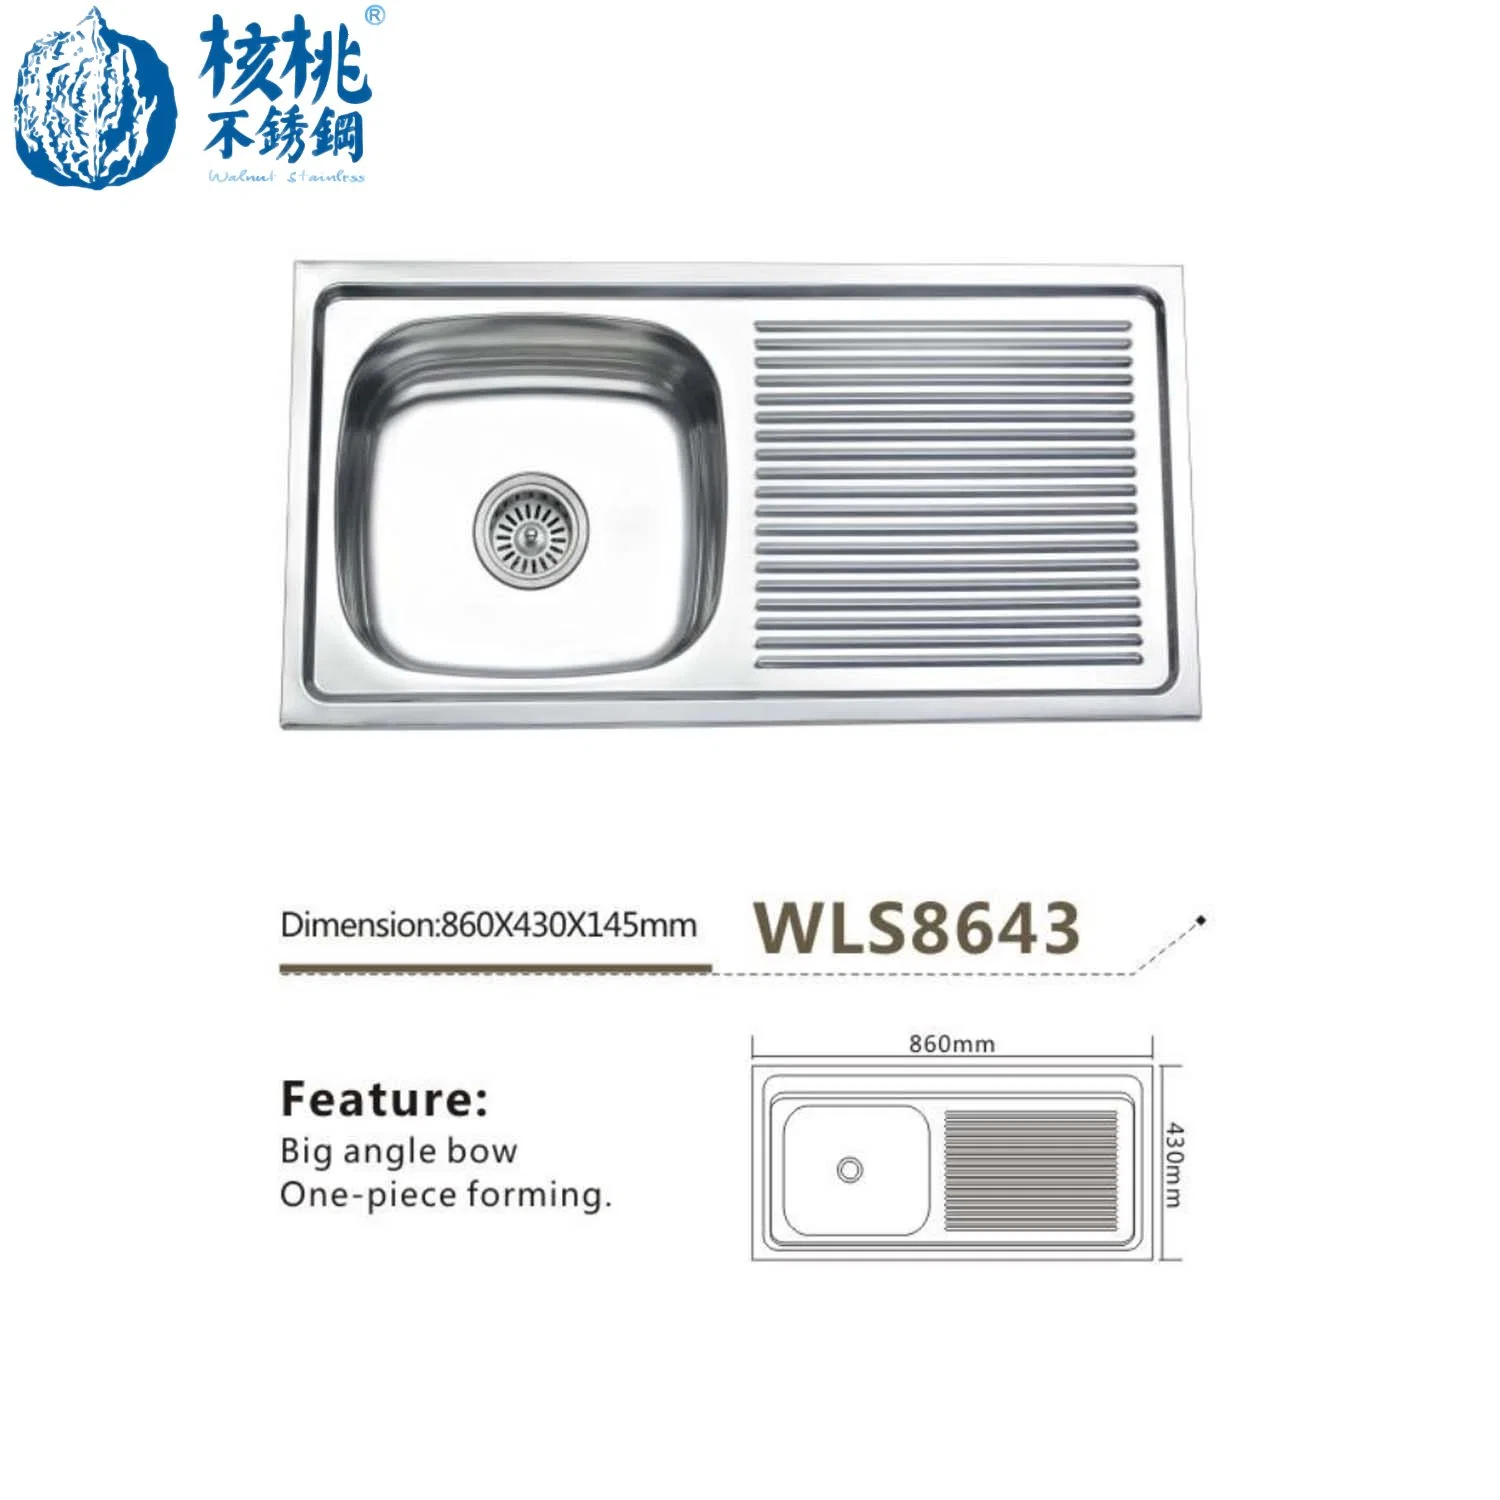 Single Bowl with Single Drain, One-Piece Forming Wls9650